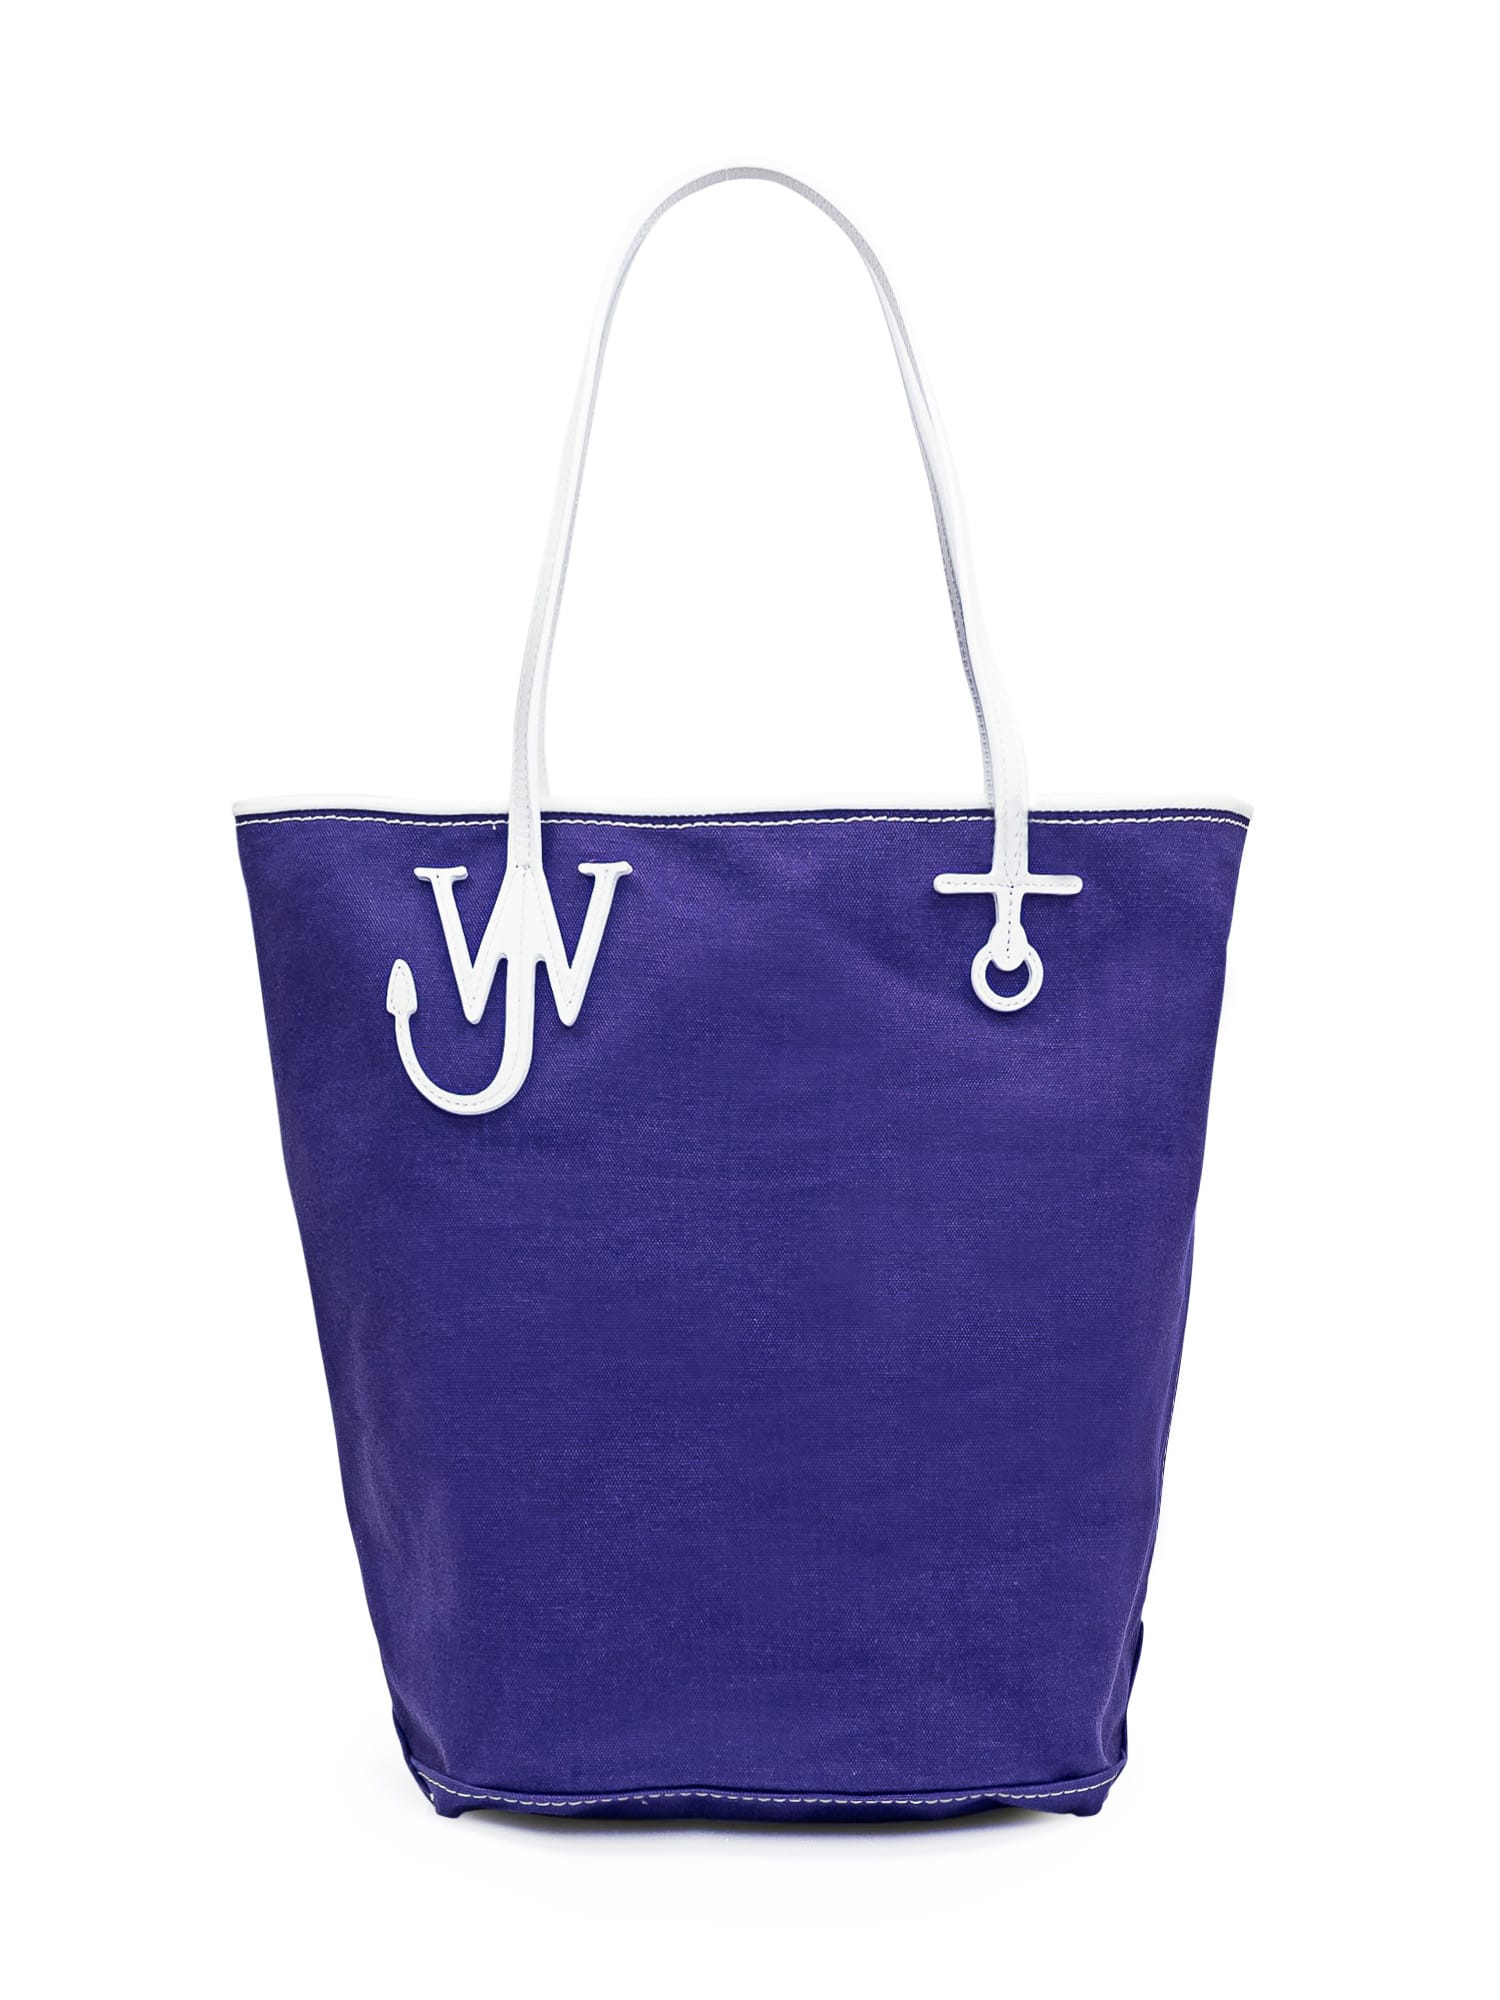 Jw Anderson Anchor Tote Bag In Blue/white